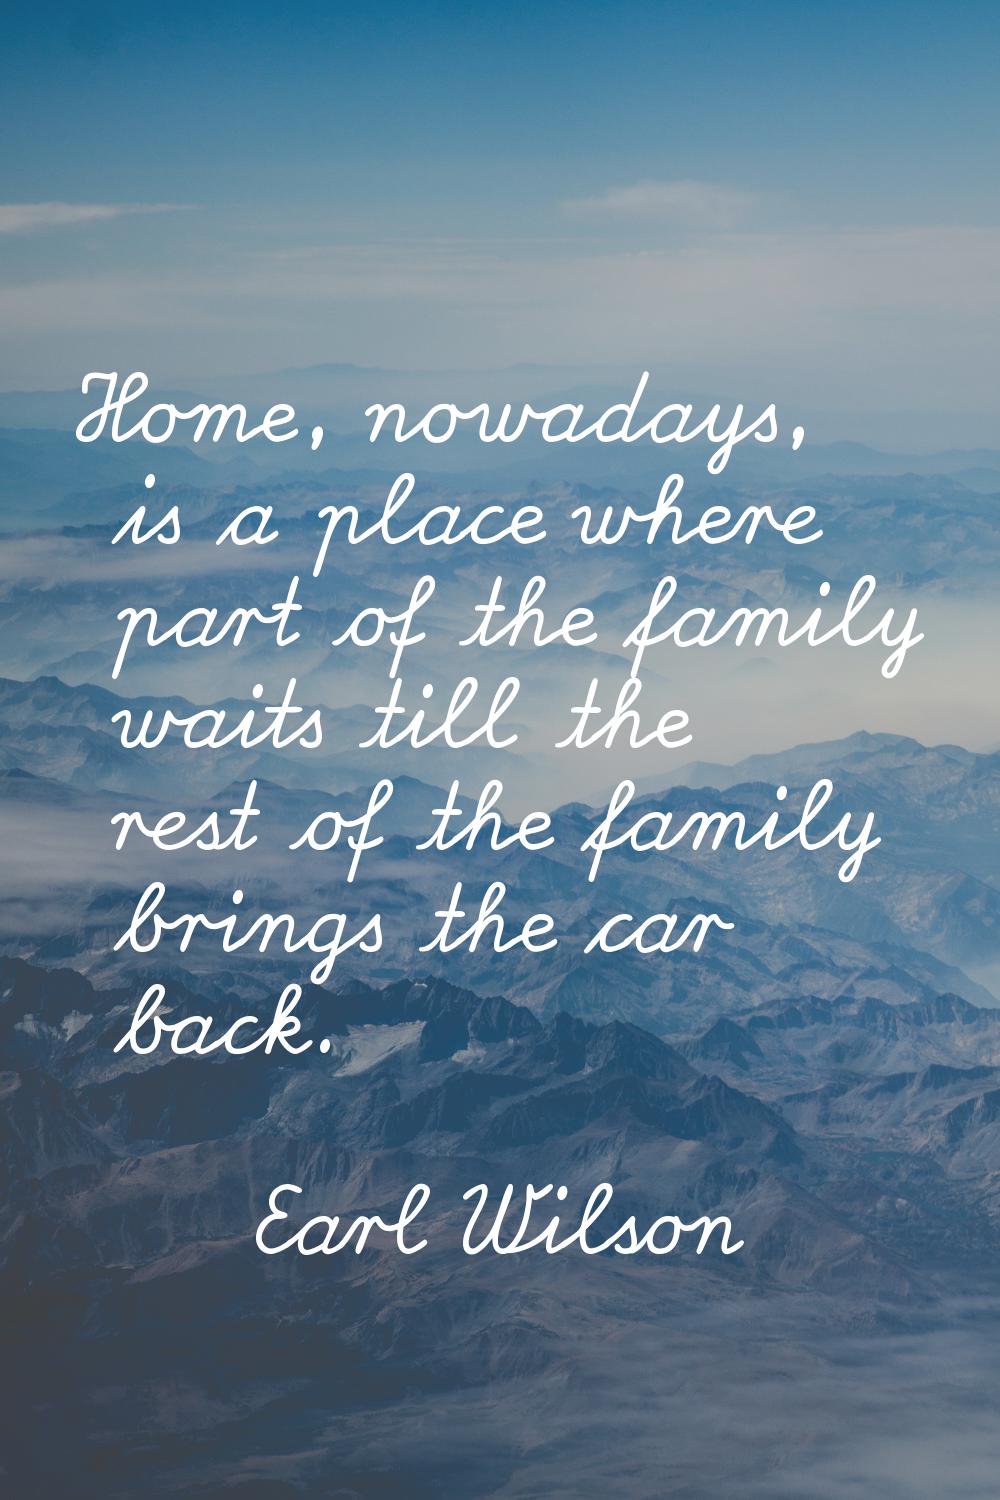 Home, nowadays, is a place where part of the family waits till the rest of the family brings the ca